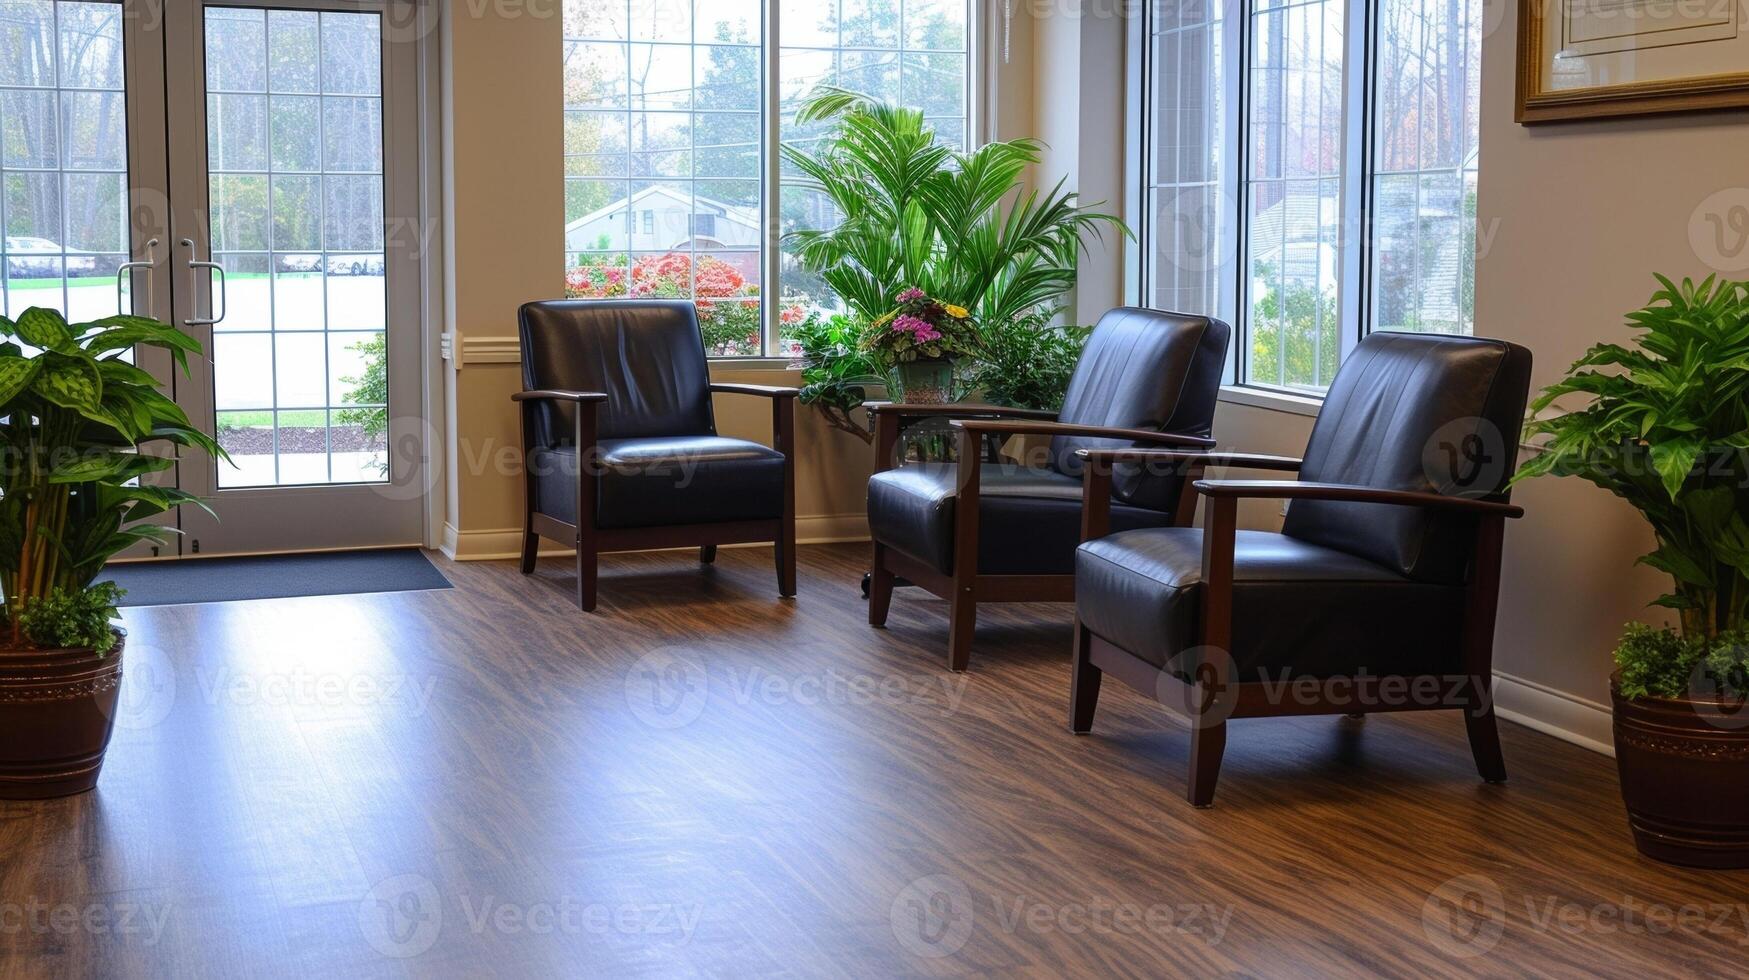 A seniorfriendly living space with a new slipresistant floor designed to promote independence and safety for retirees photo